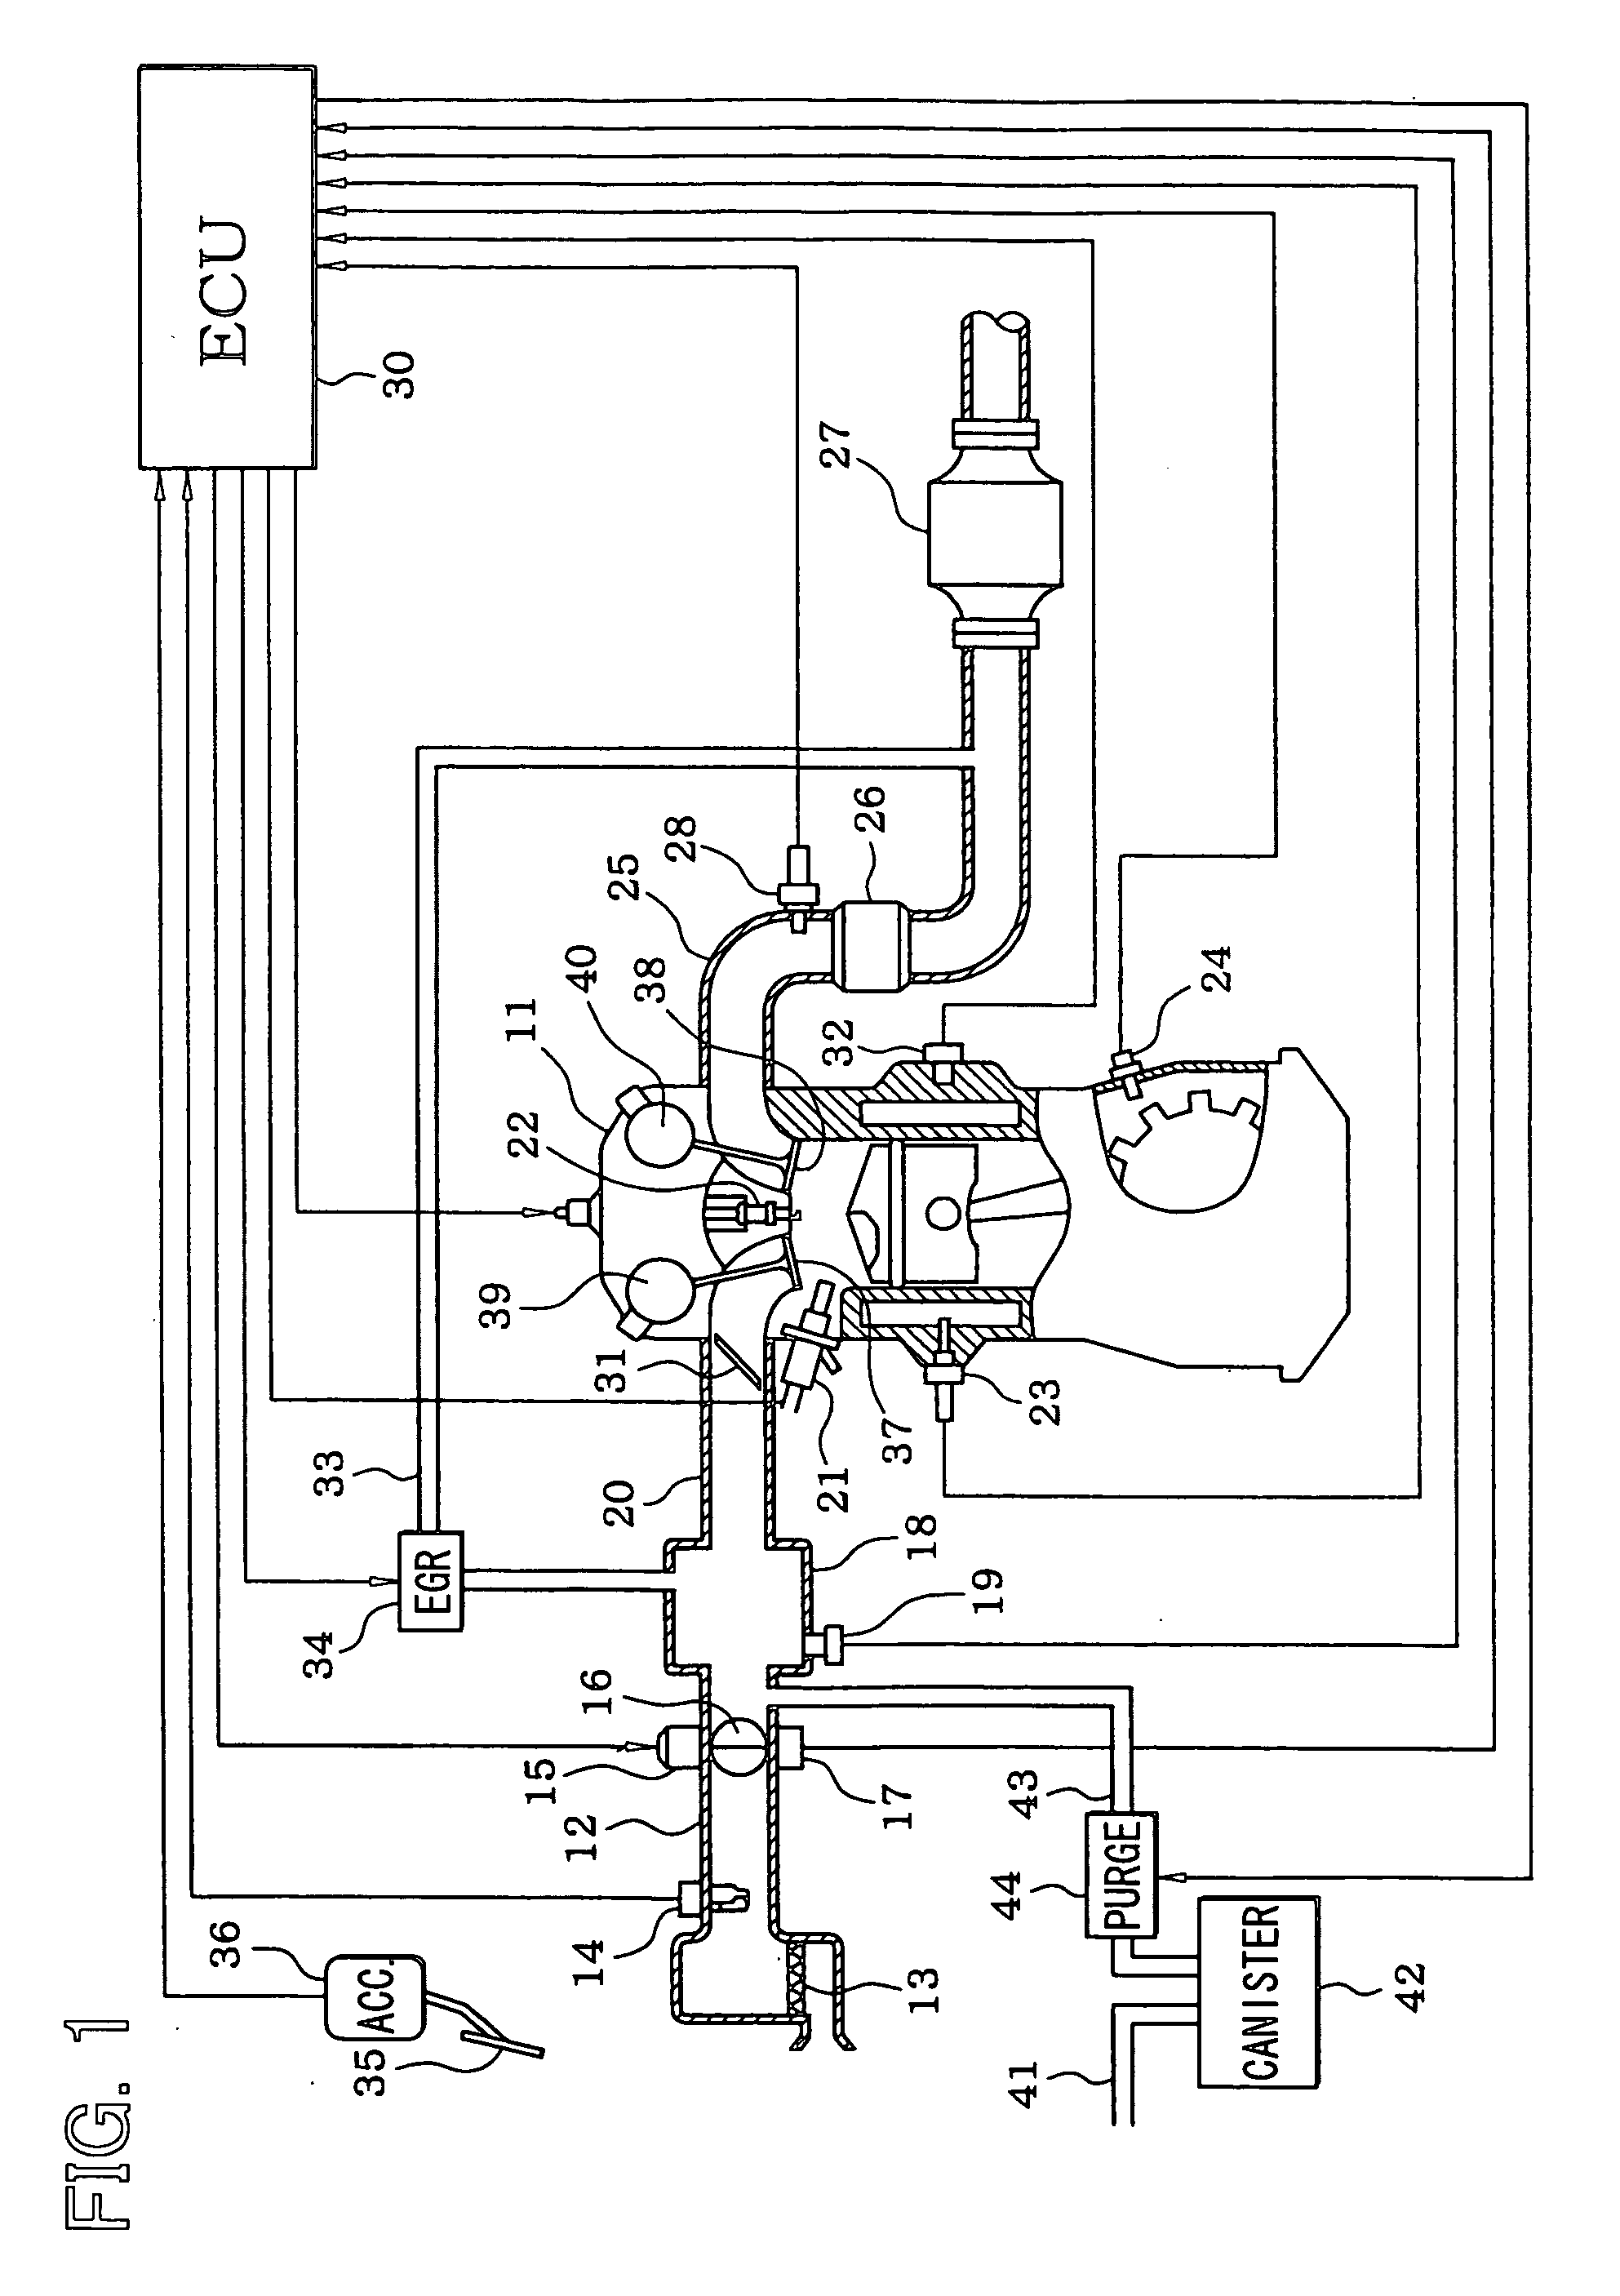 Fuel injection controller for in-cylinder injection engine